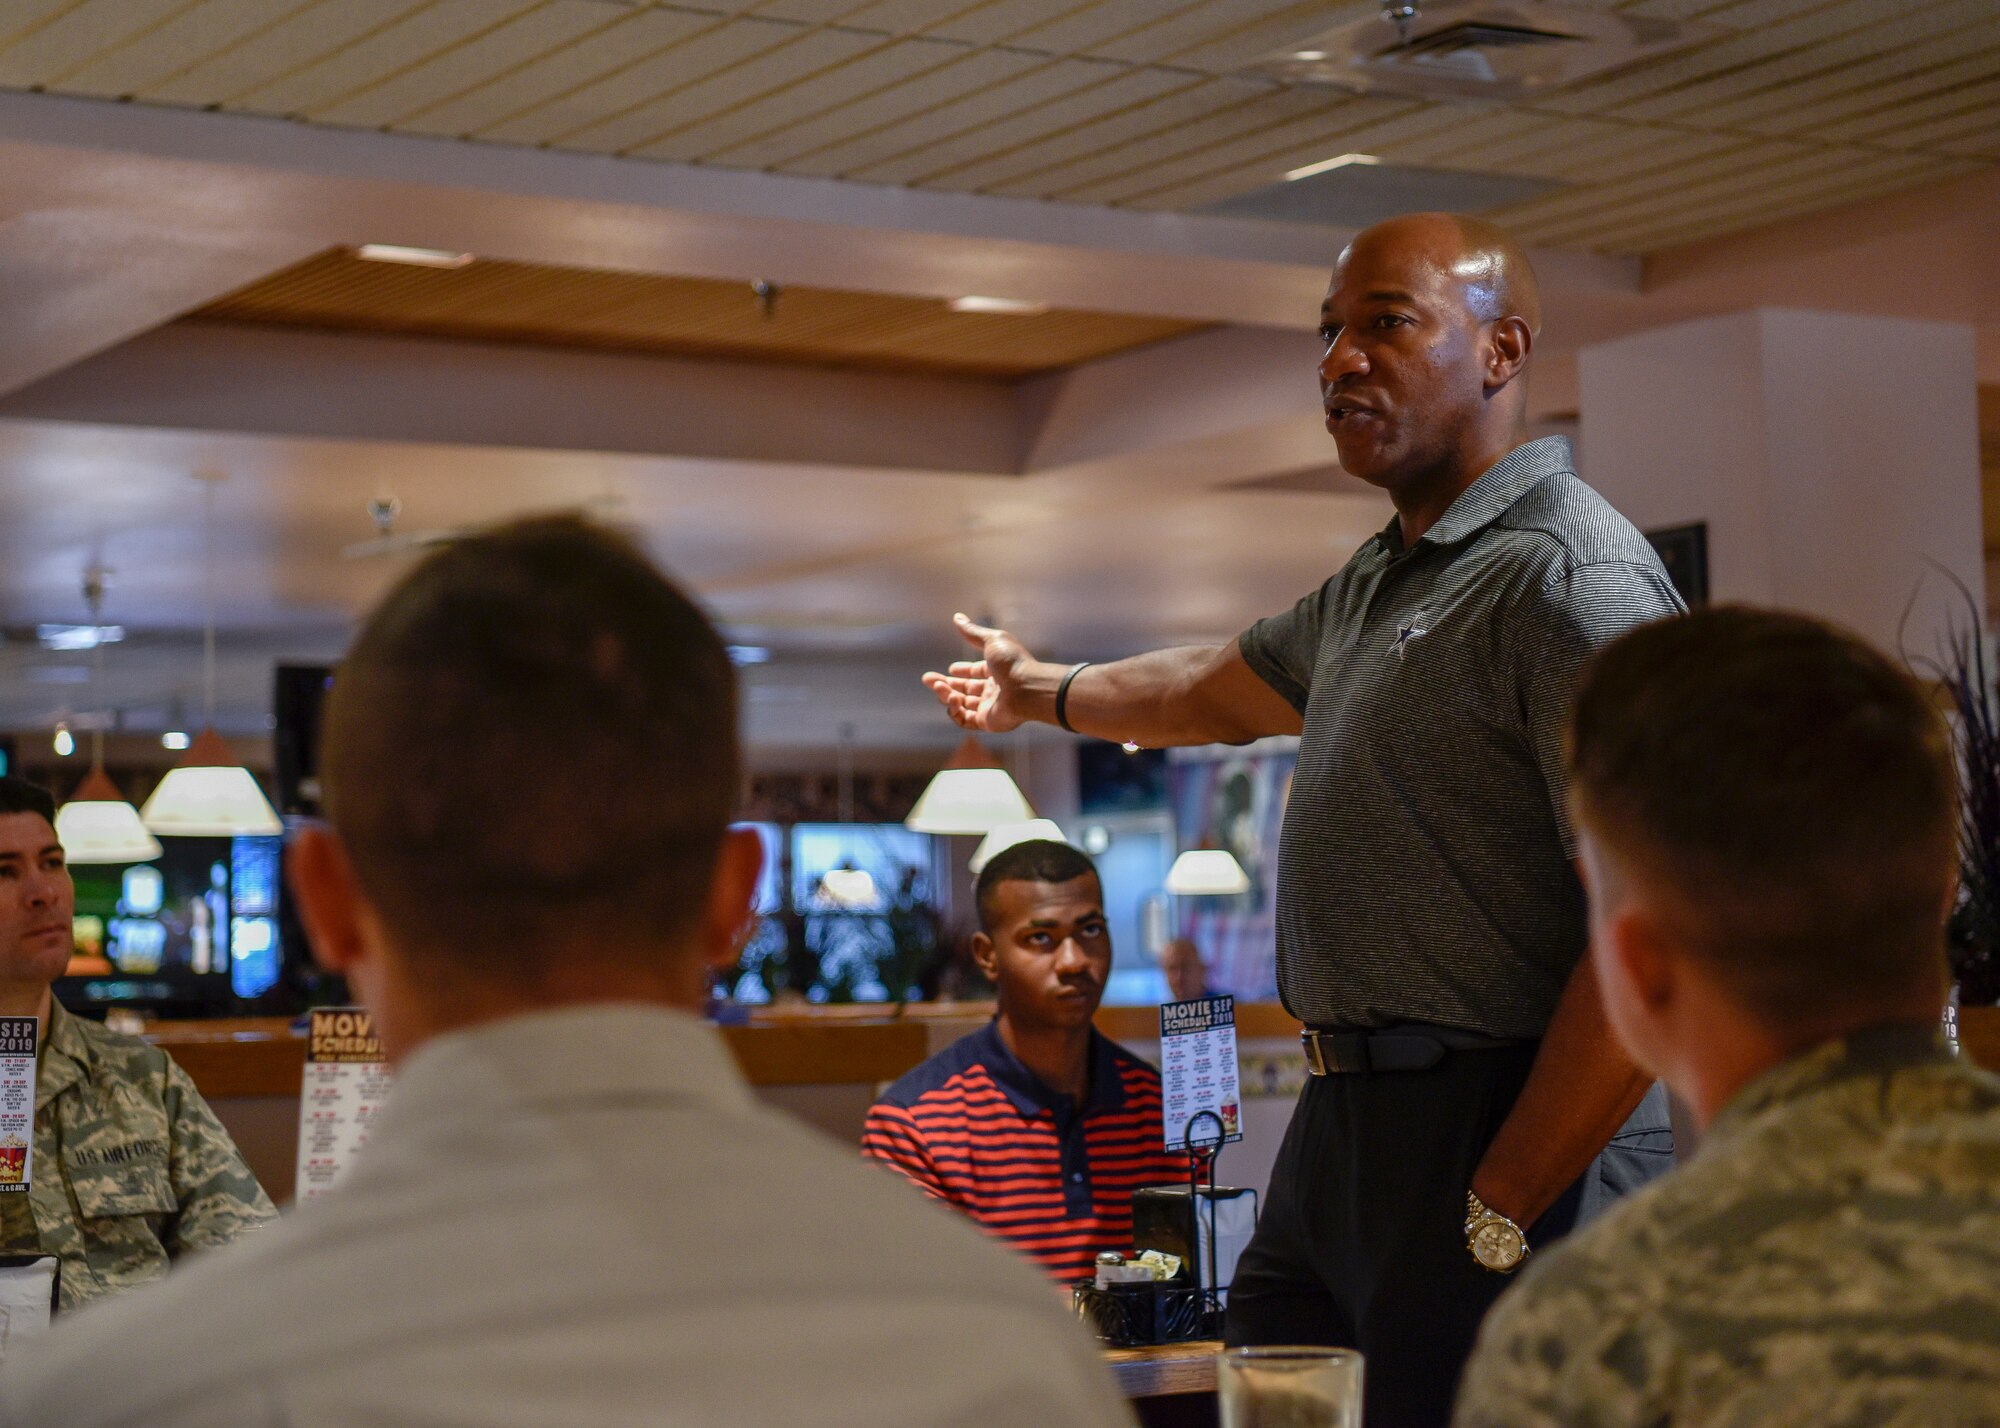 Chief Master Sgt. of the Air Force Kaleth O. Wright talks about leadership with Airmen at Kirtland Air Force Base, N.M., Sept. 28, 2019. Exceptional Airmen from various units at Kirtland were chosen to have breakfast with Wright, ask questions, and learn from the experiences that the chief has had in his Air Force career. (U.S. Air Force photo by Airman 1st Class Austin J. Prisbrey)